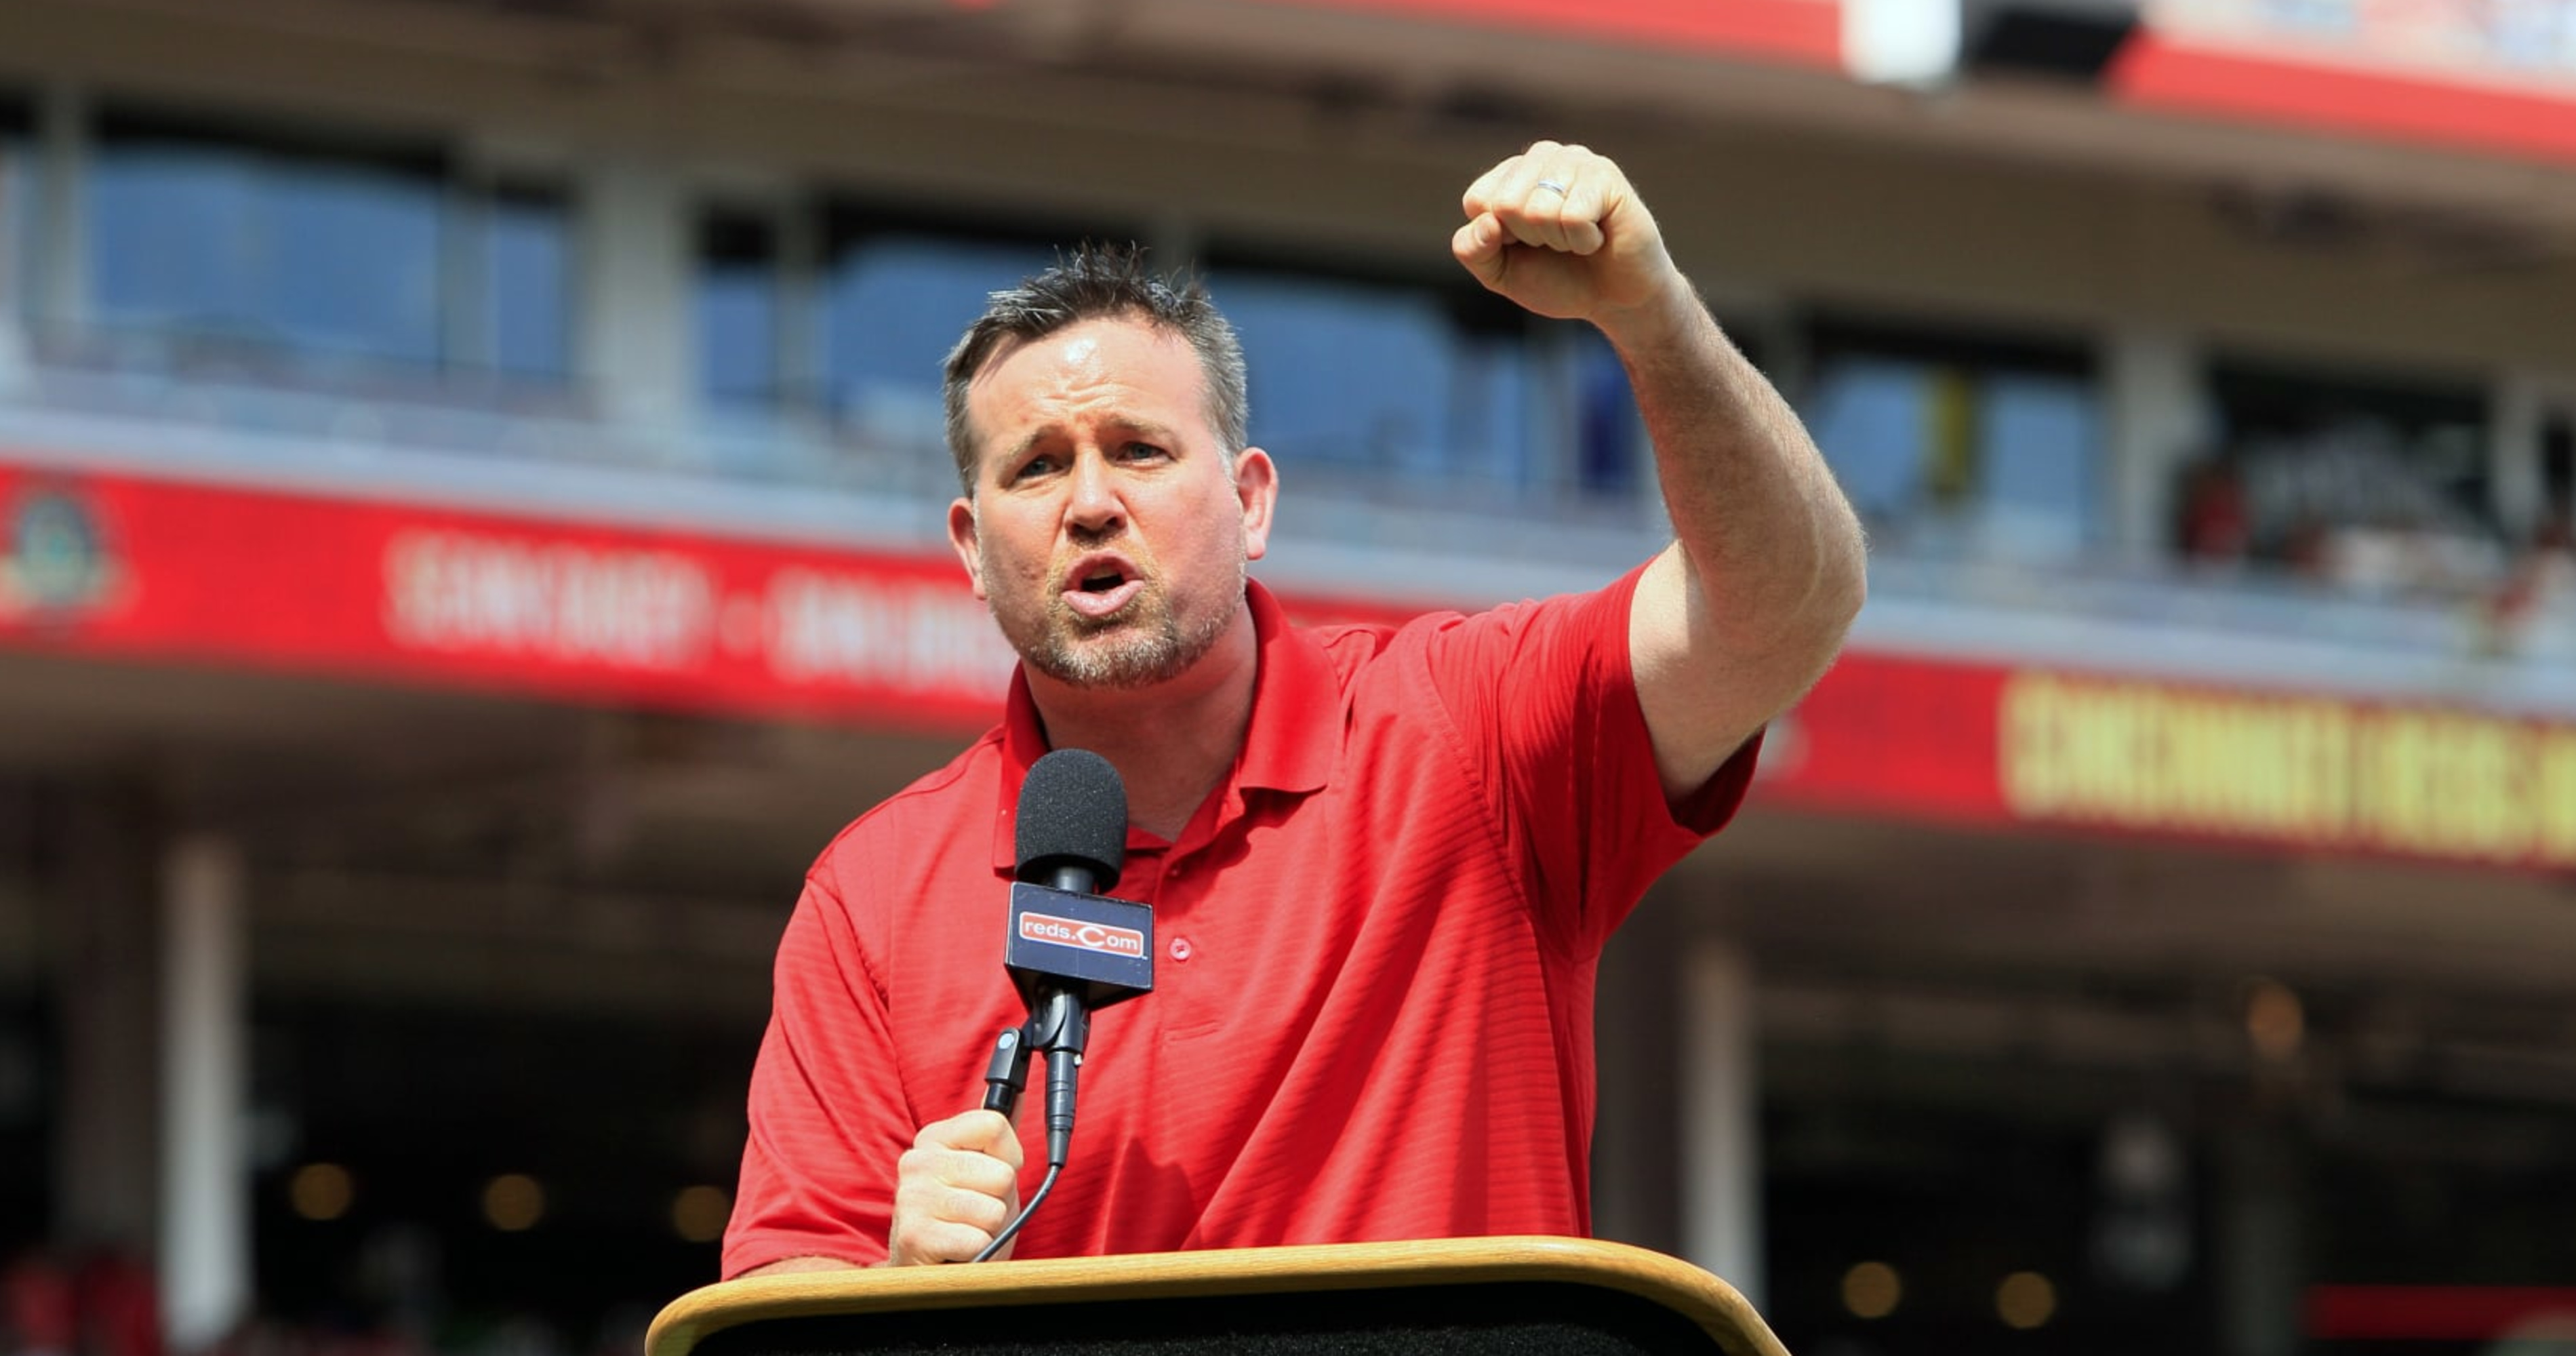 New York Yankees: Sean Casey admits he has to 'come in hot and firing